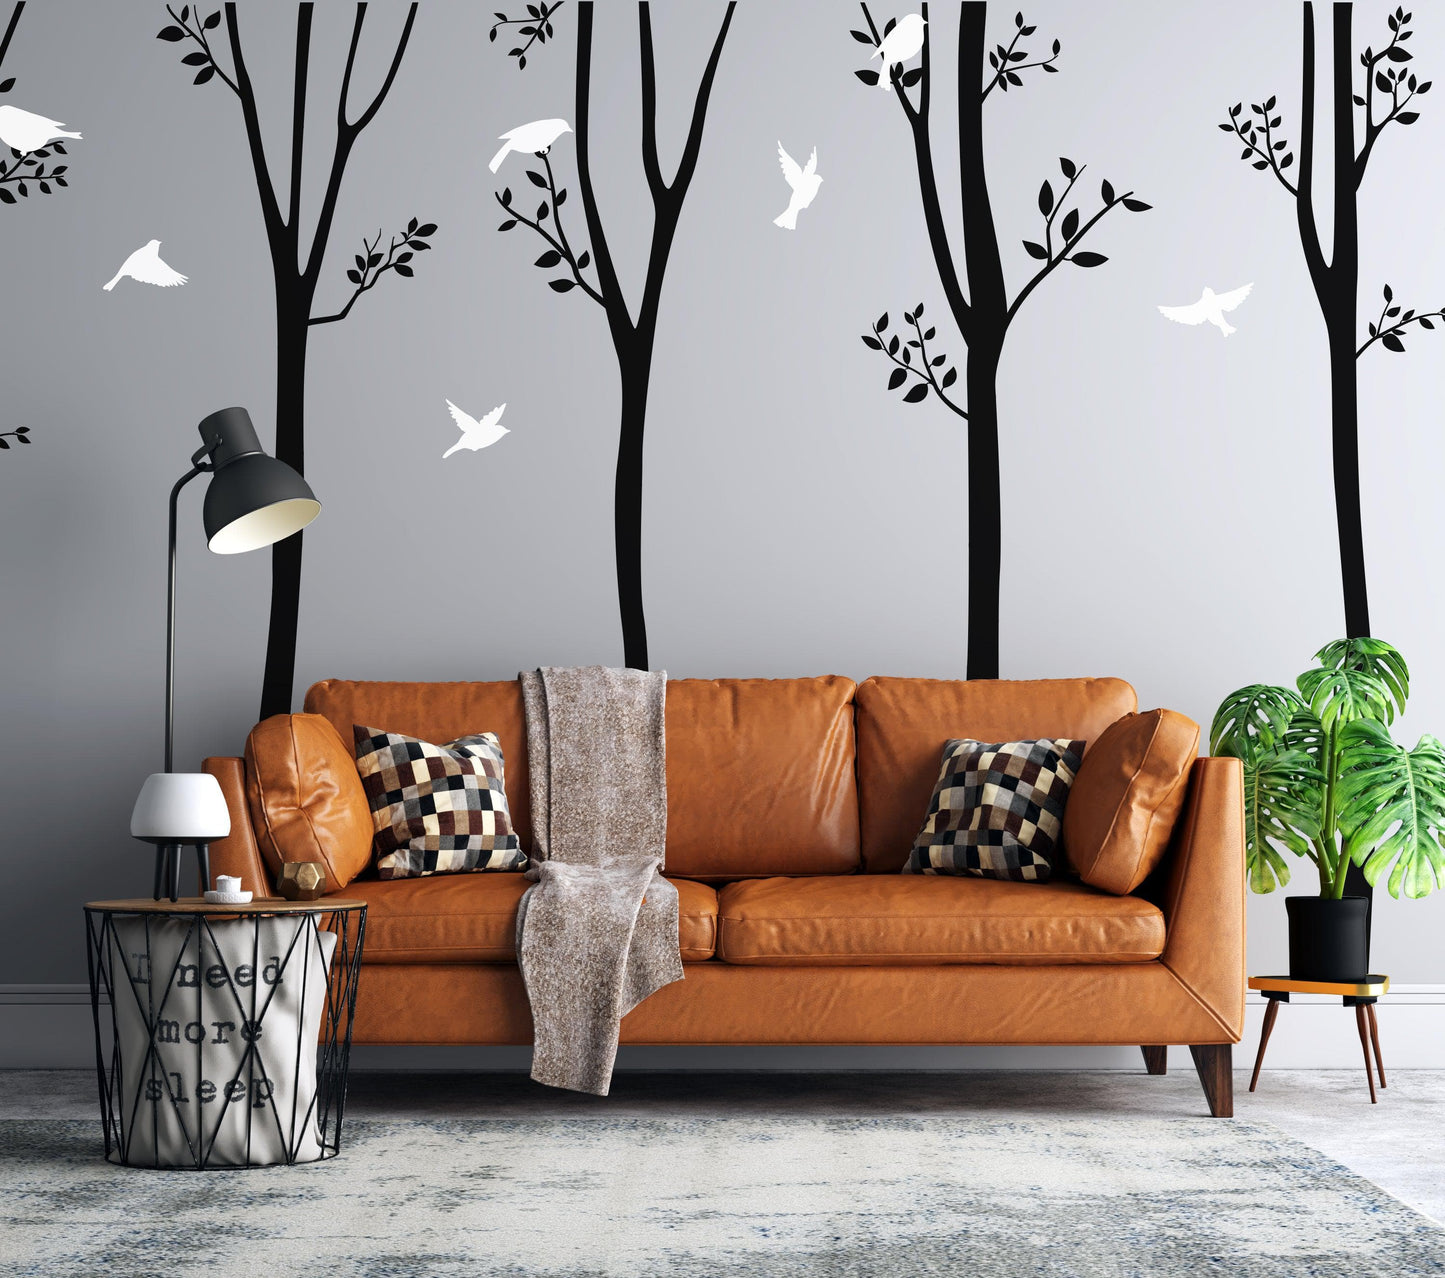 Timberland Forest Trees with Flying Birds Vinyl Wall Decal. #6263